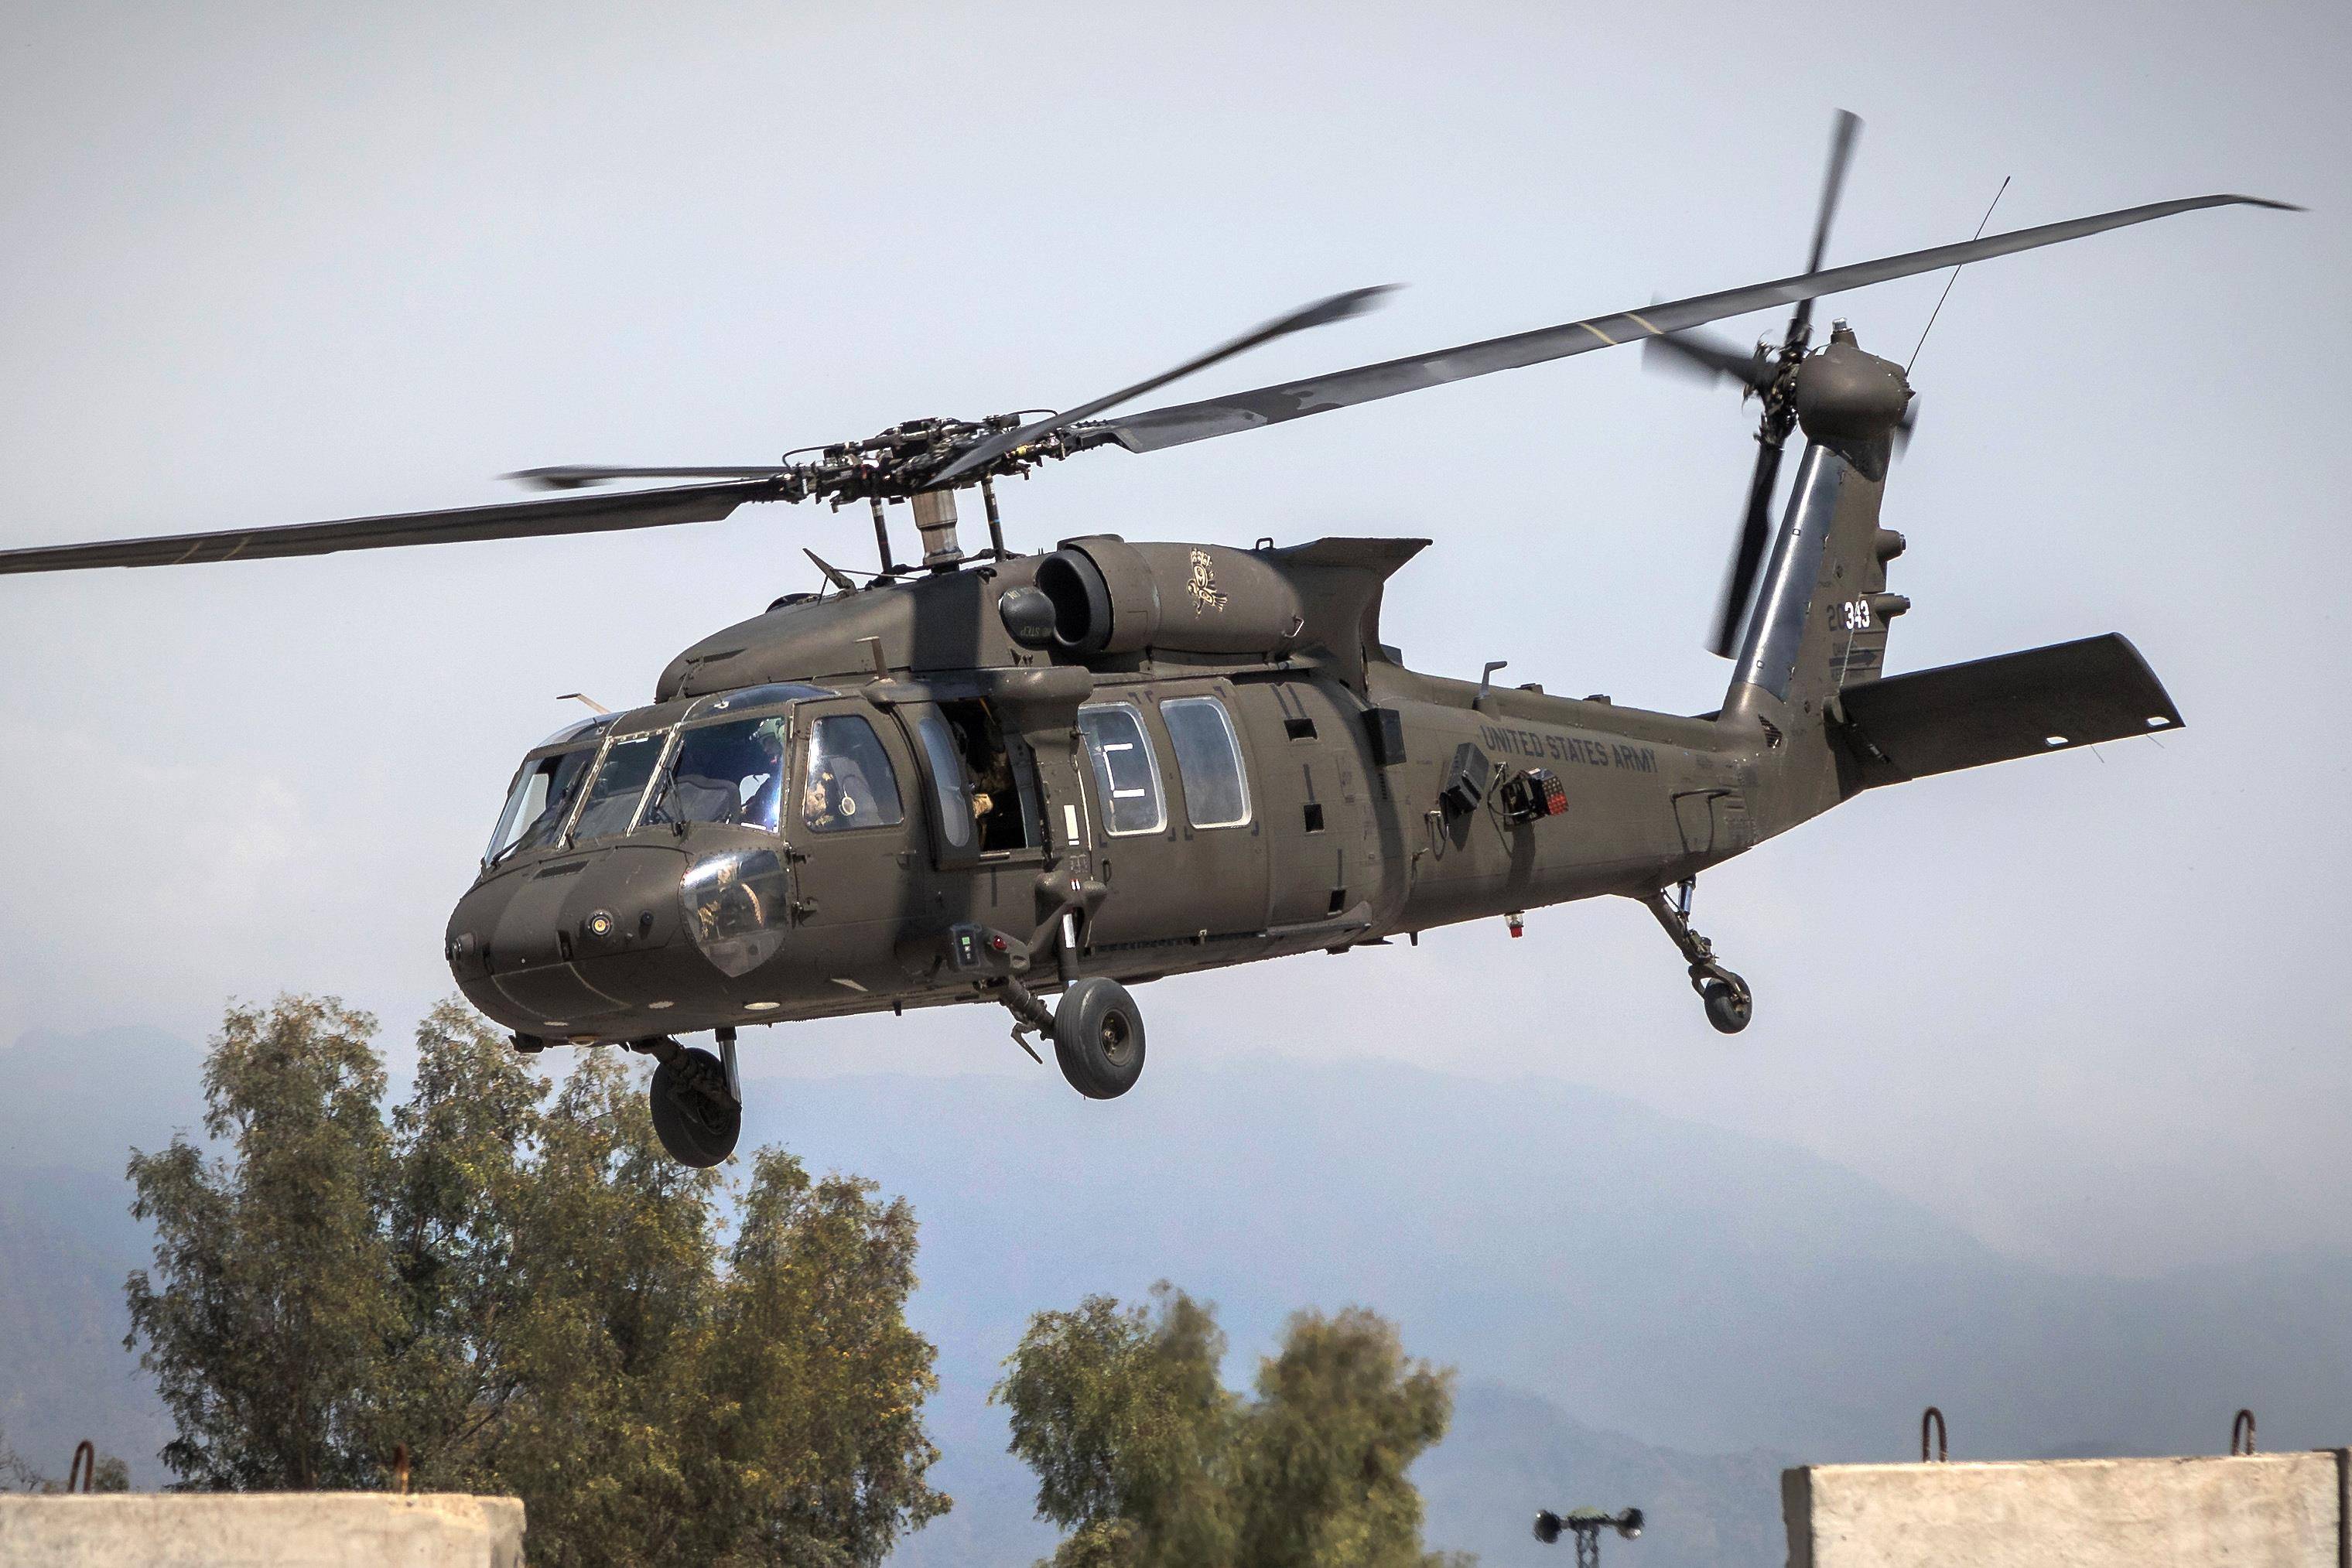 Uh-60 / s-70a black hawk multi-mission helicopter